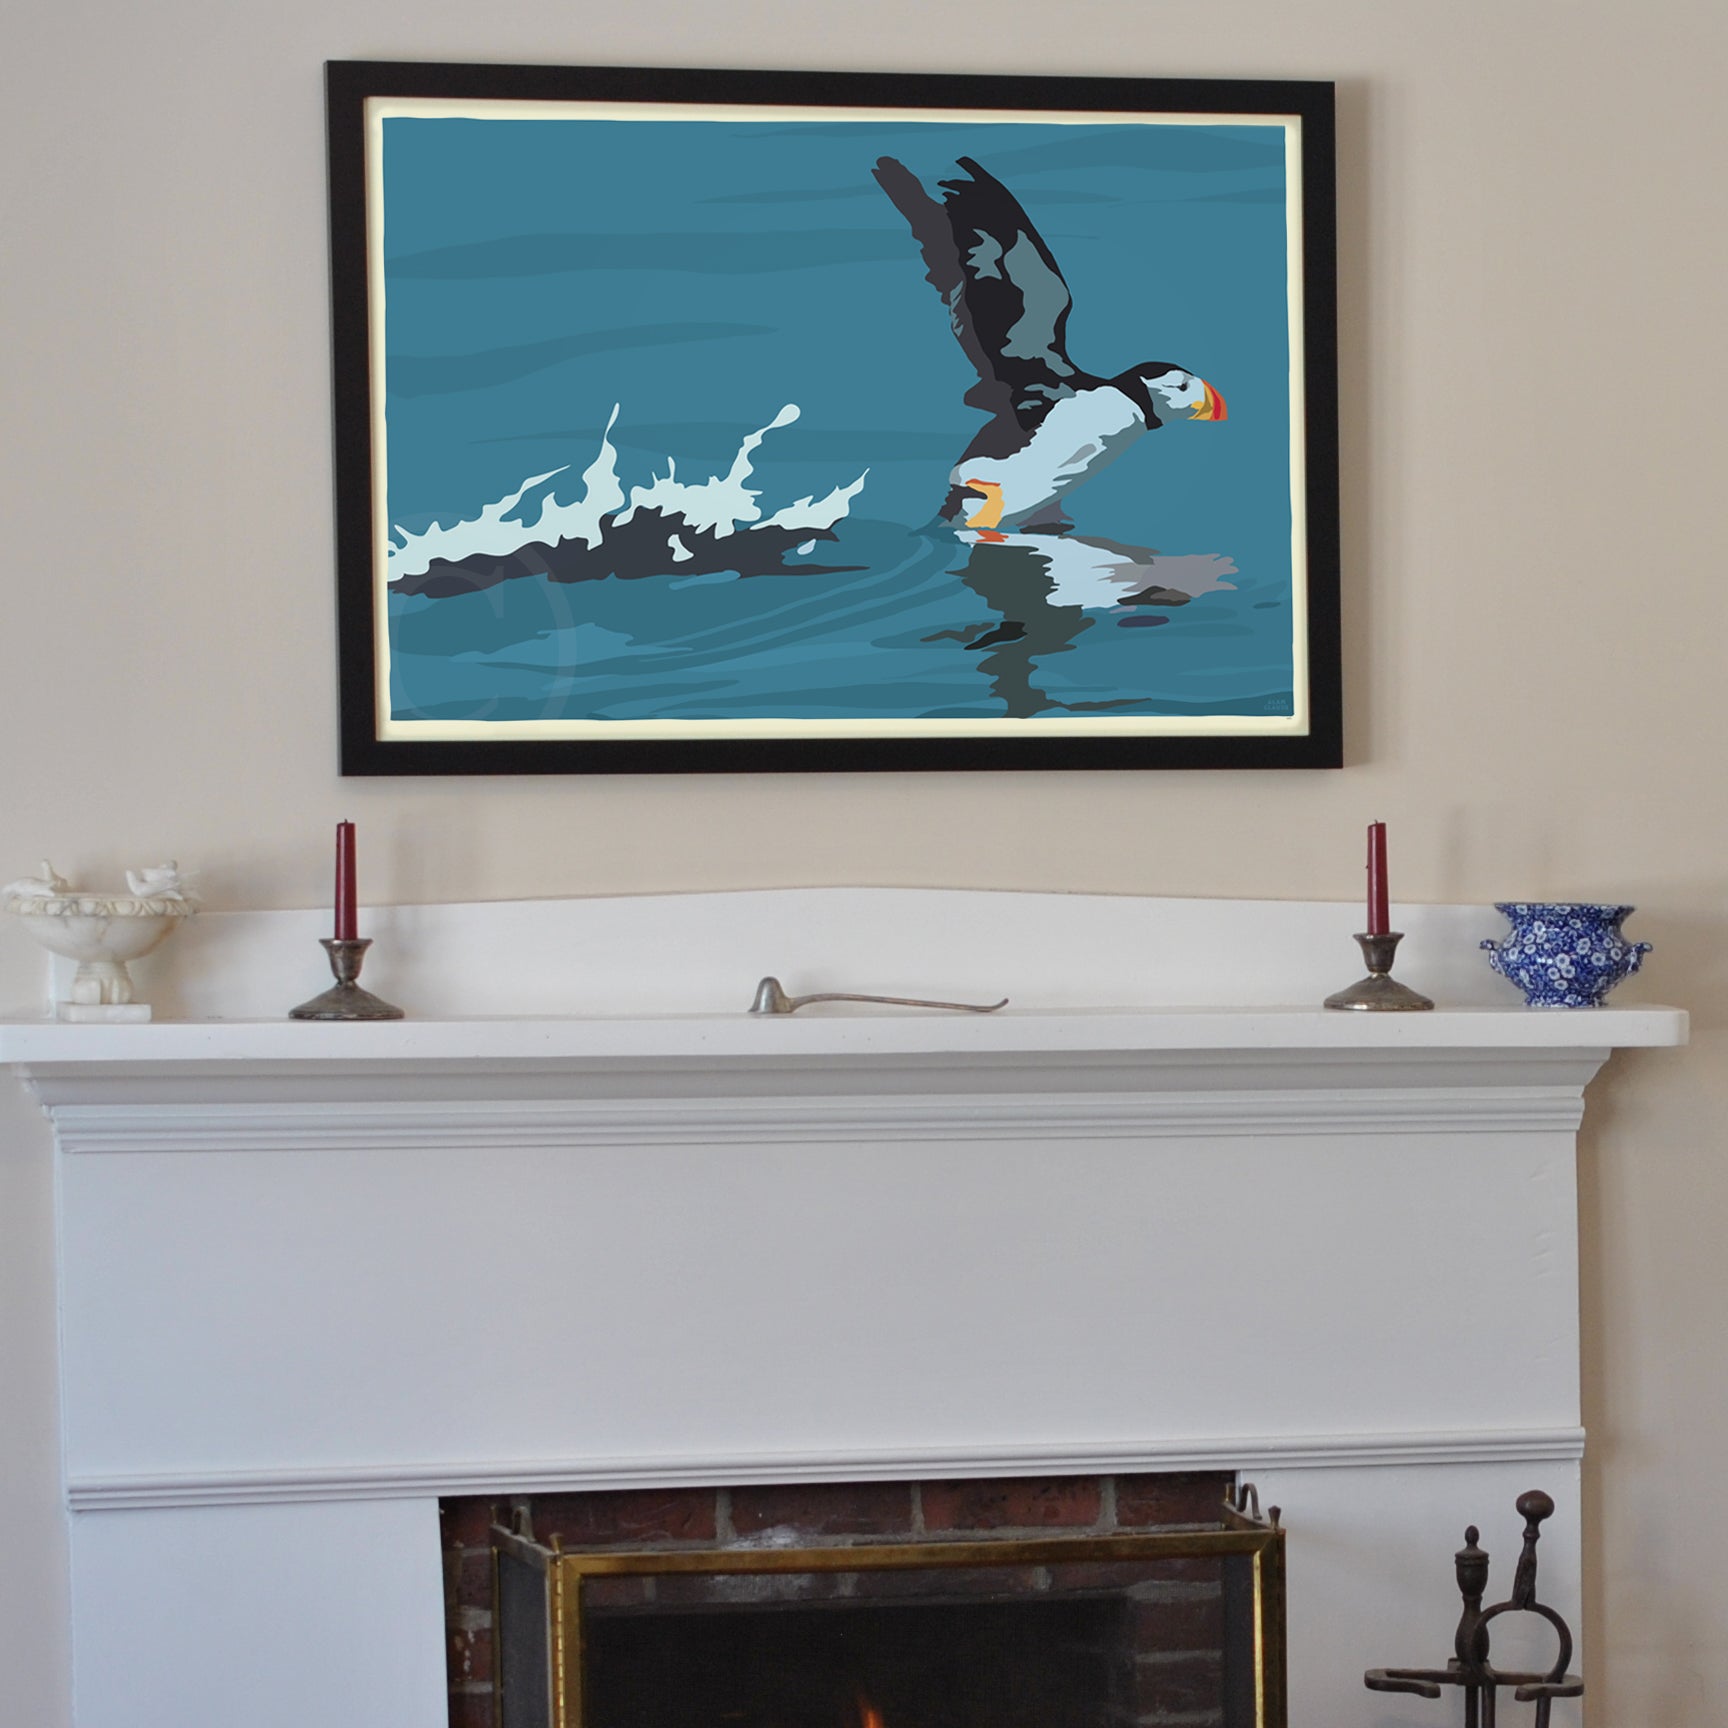 Puffin Takes Flight Art Print 24" x 36" Framed Wall Poster By Alan Claude - Maine